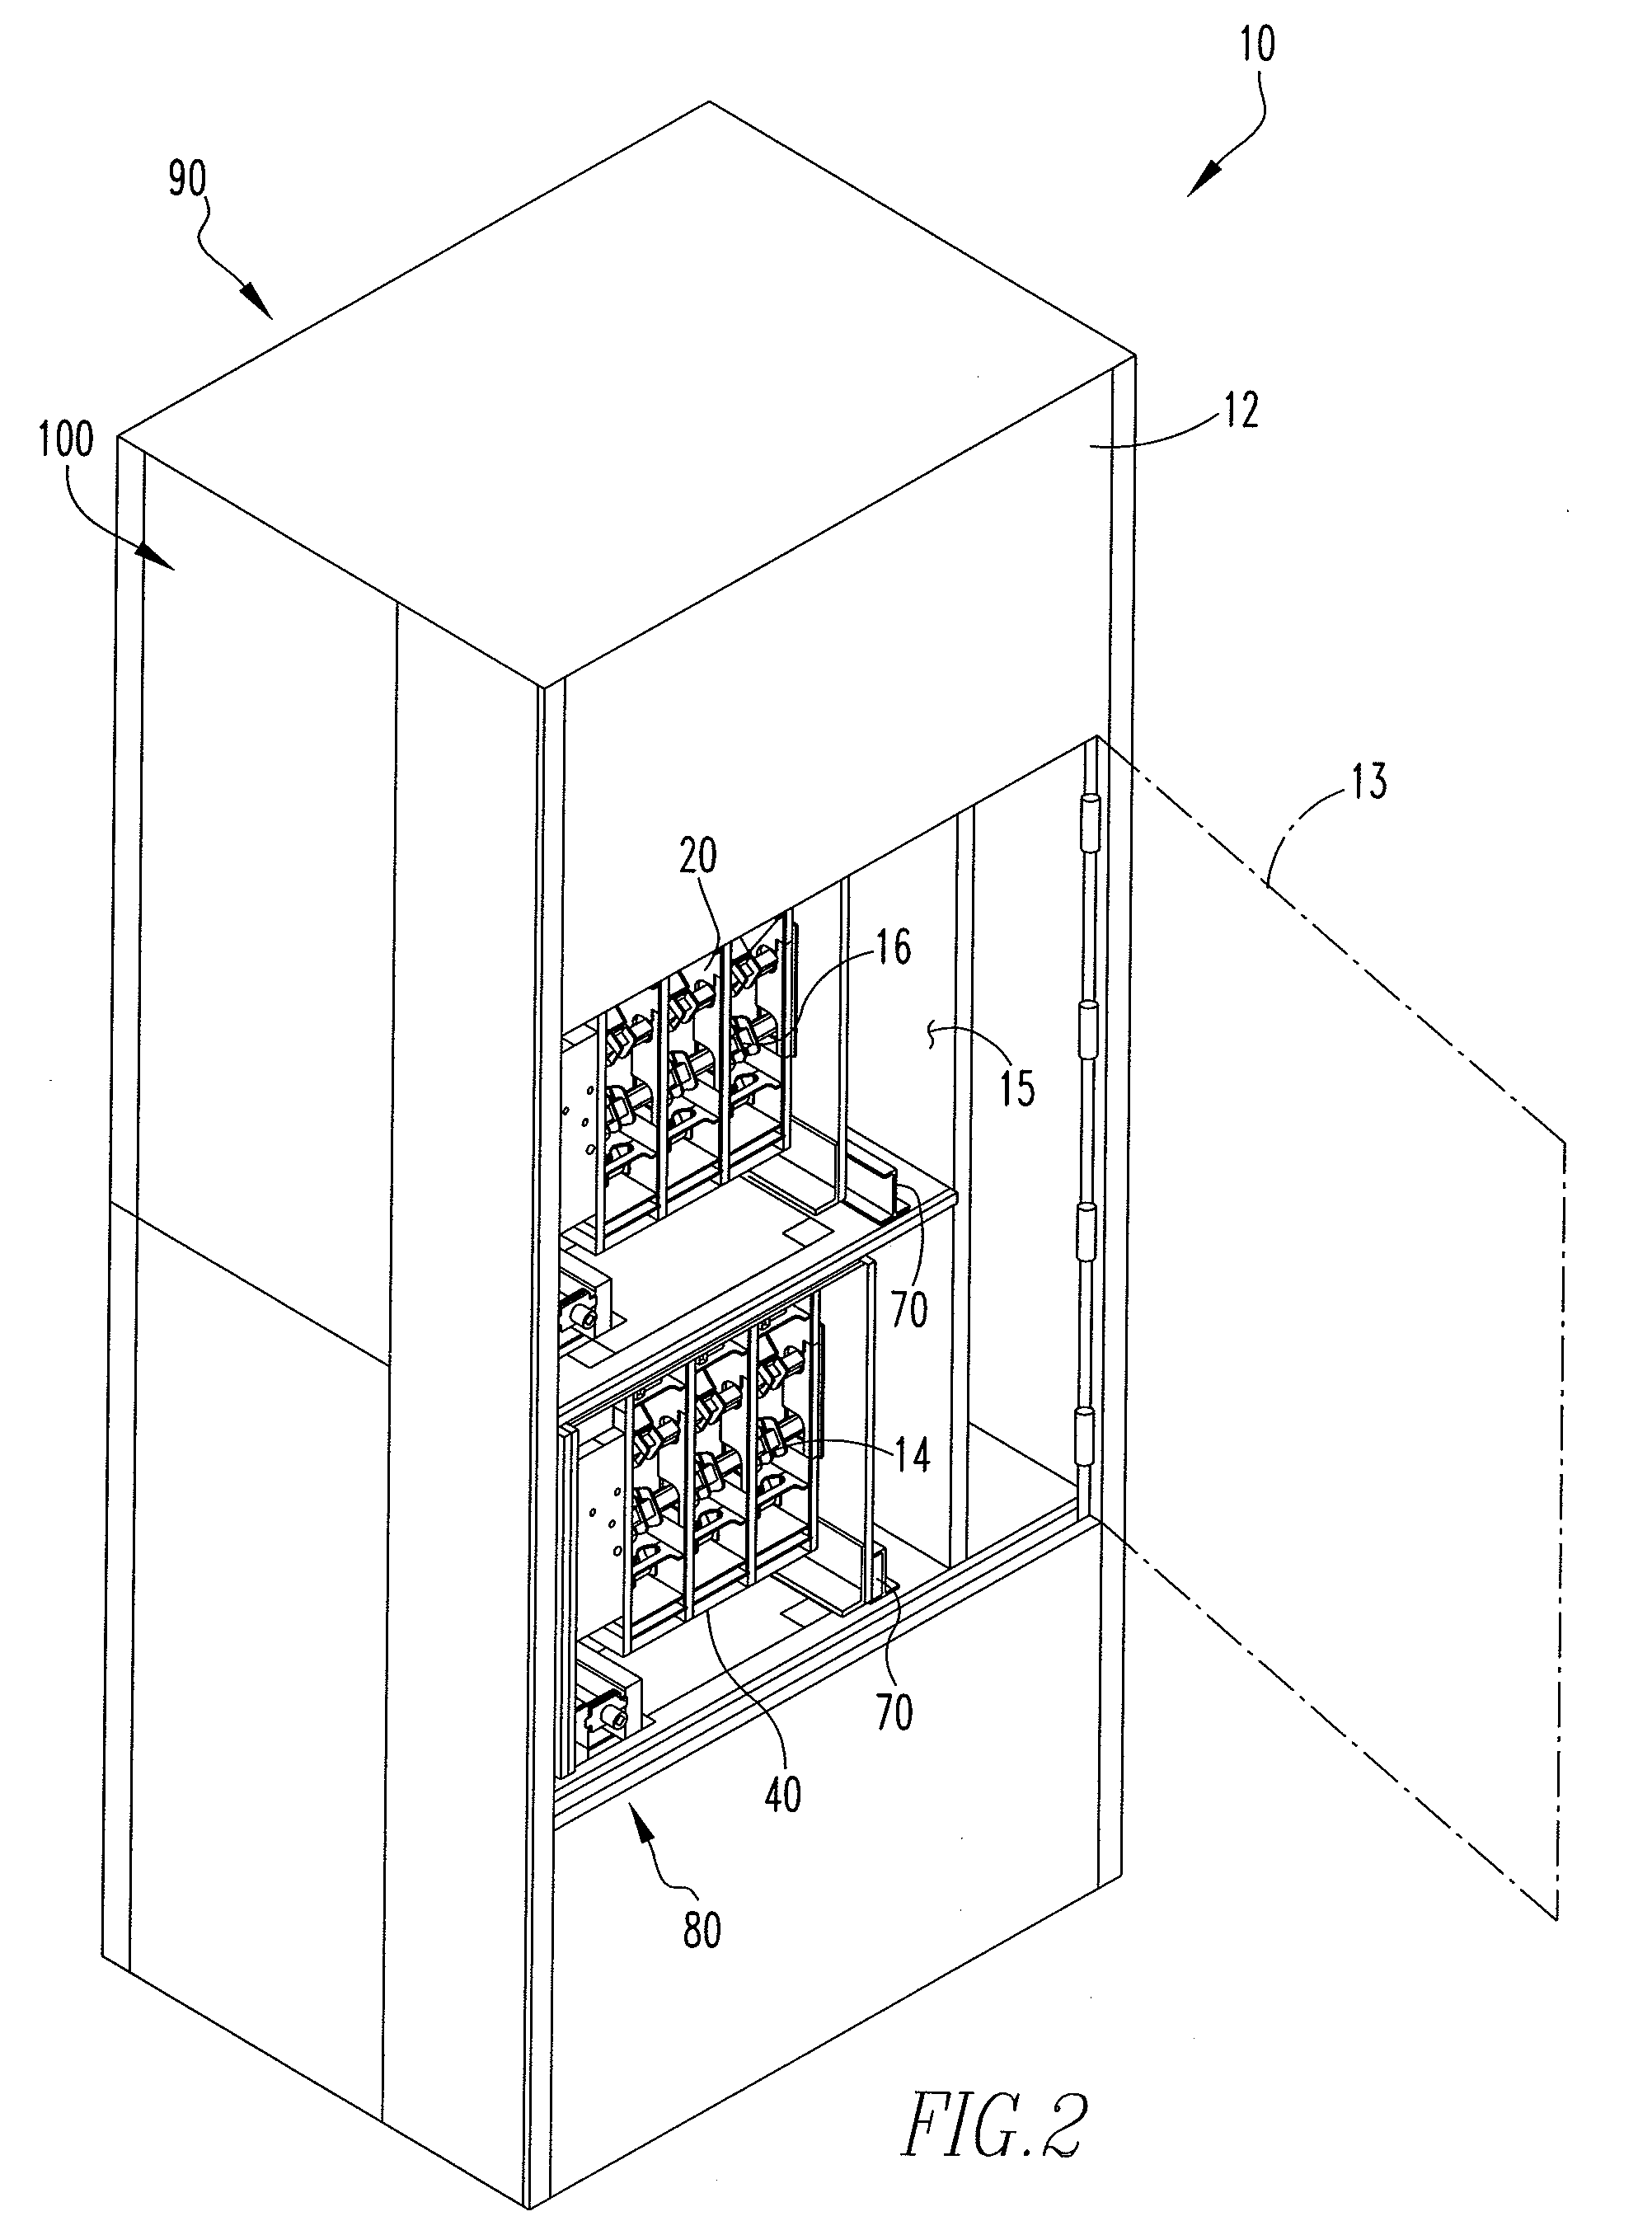 Neutral draw-out automatic transfer switch assembly and associated method